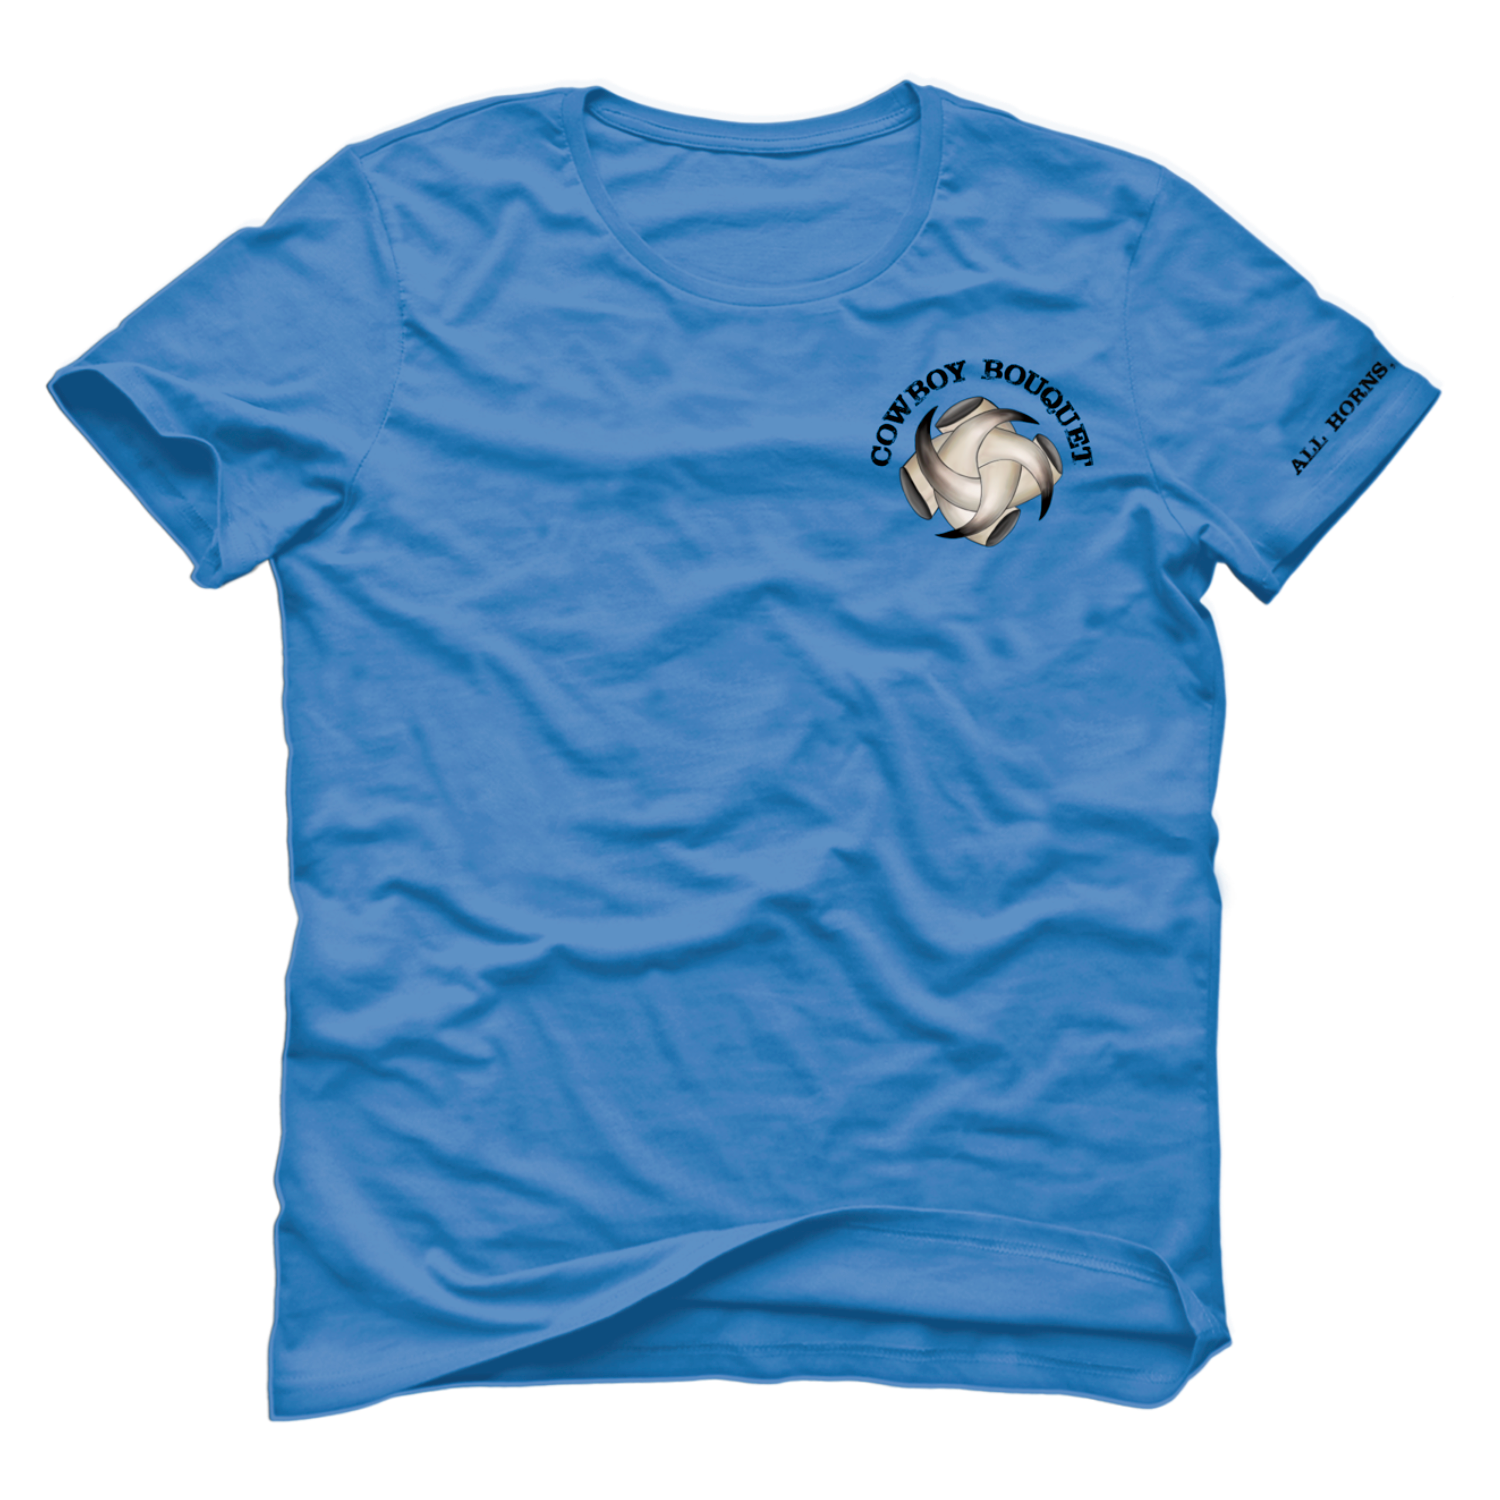 Carolina blue unisex tshirt with the Cowboy Bouquet brand on the pocket side and the left sleeve